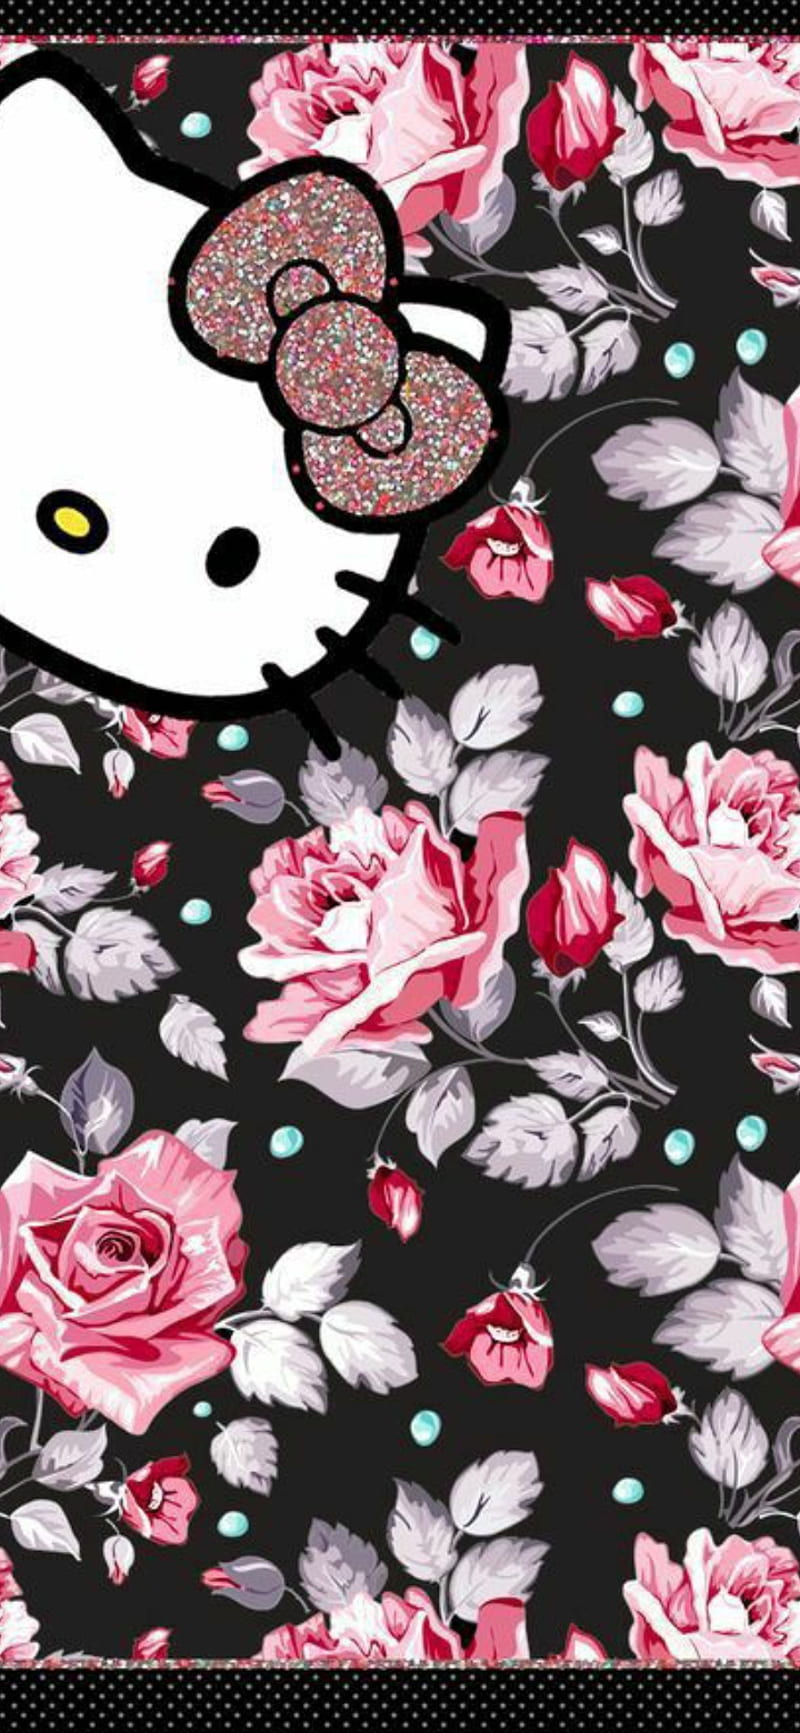 Download Hello Kitty wallpapers for mobile phone, free Hello